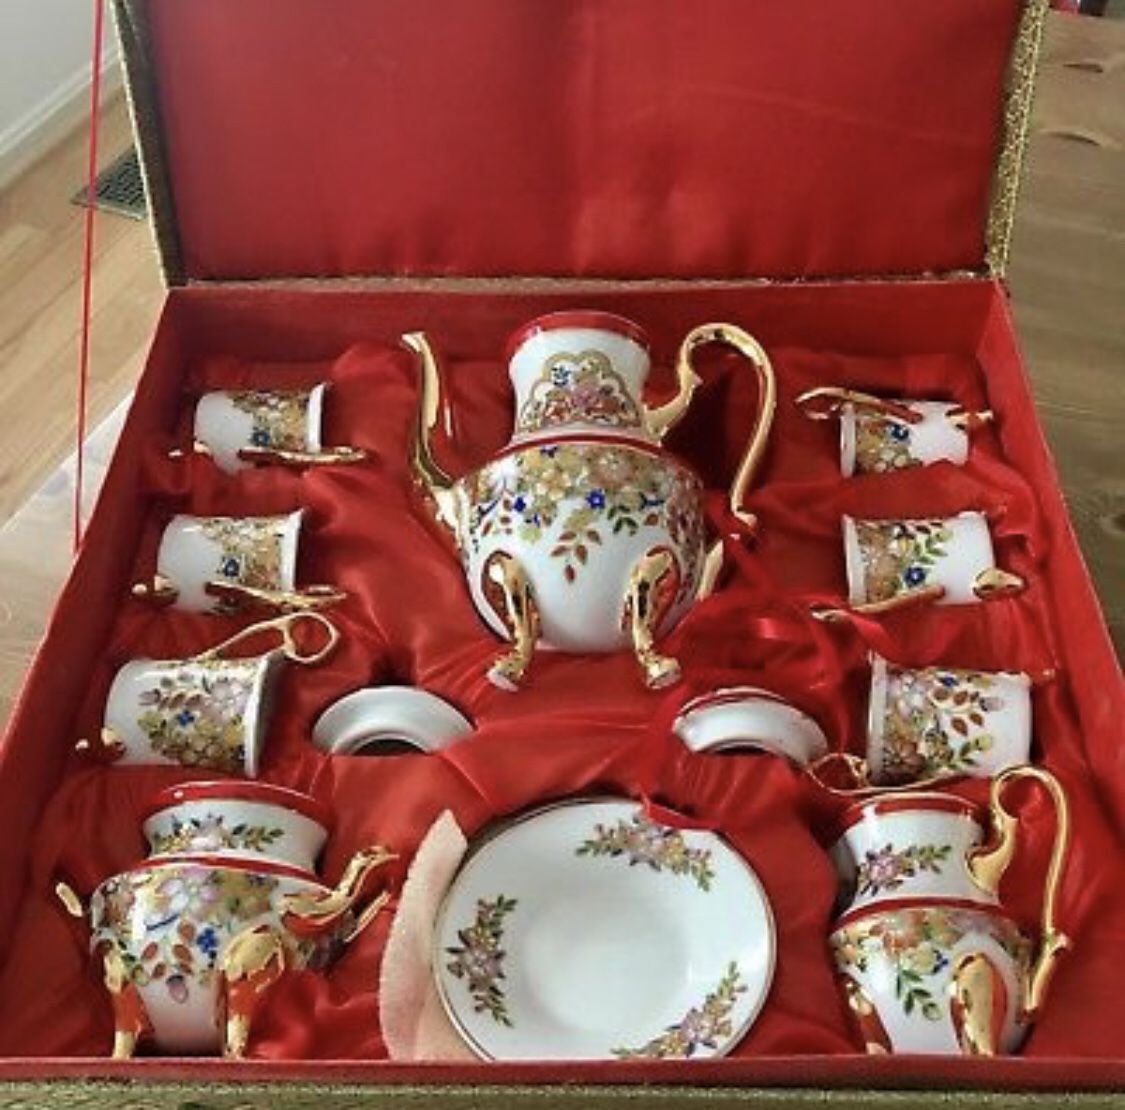 Set of 6 Red White Gold Porcelain "Espresso" Coffee Demitasse Cups Saucers & Pot